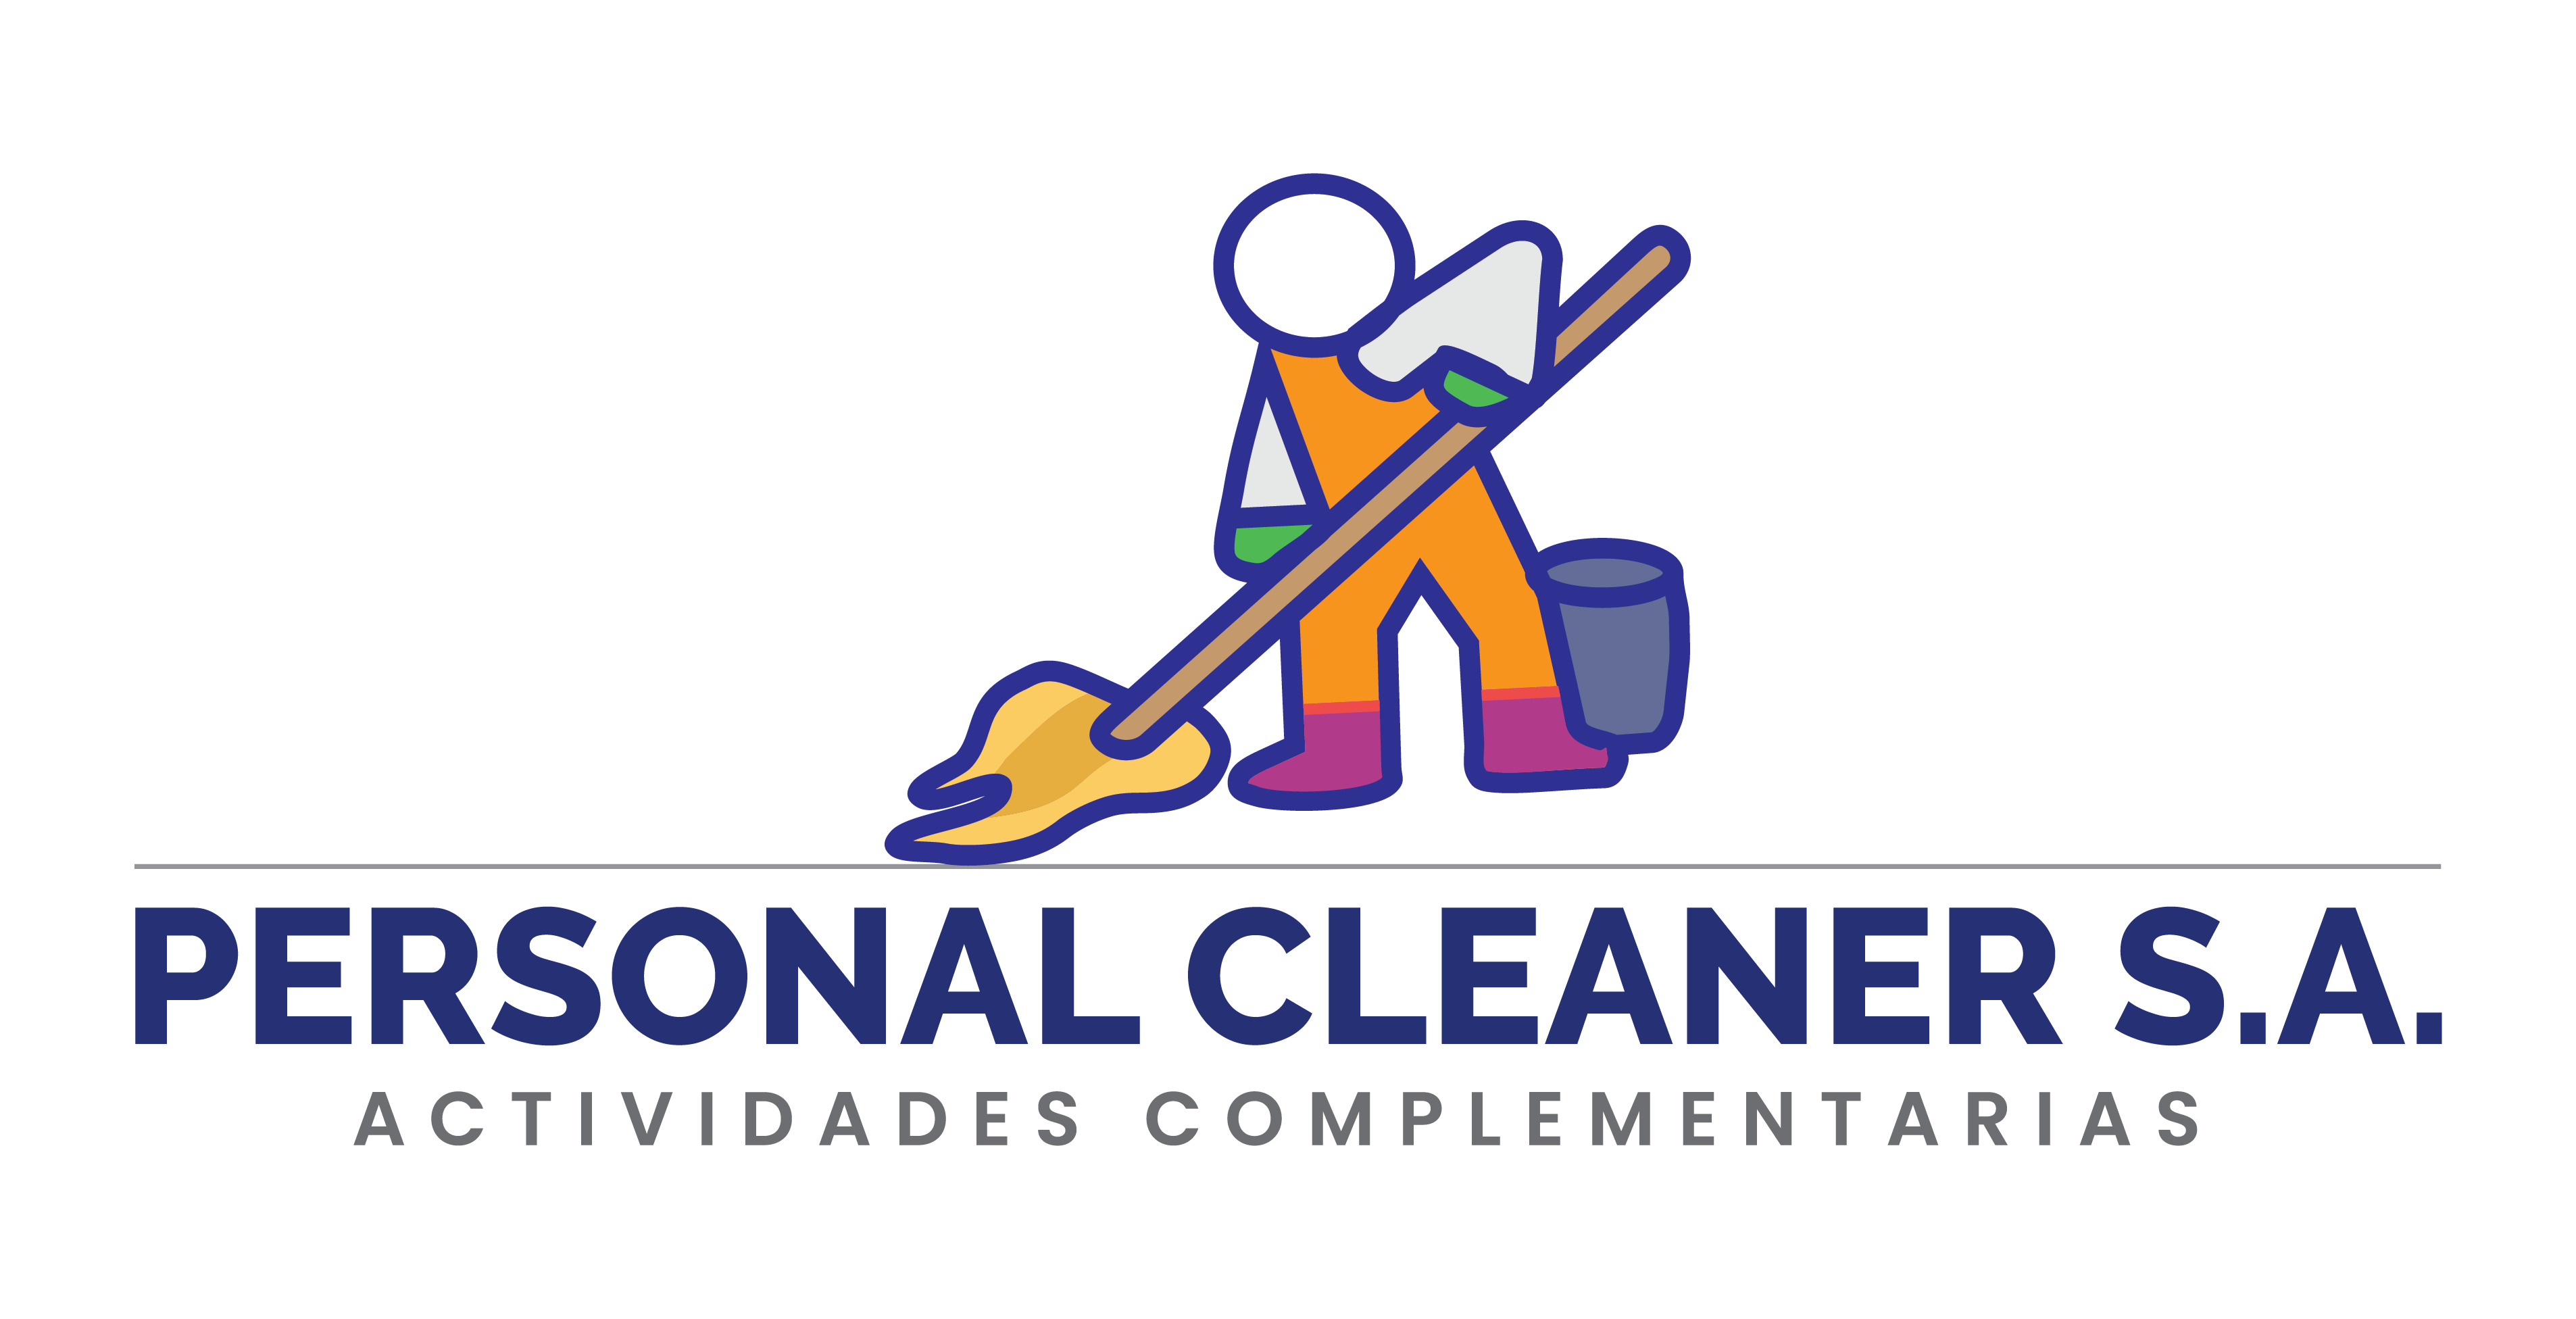 Personal Cleaner